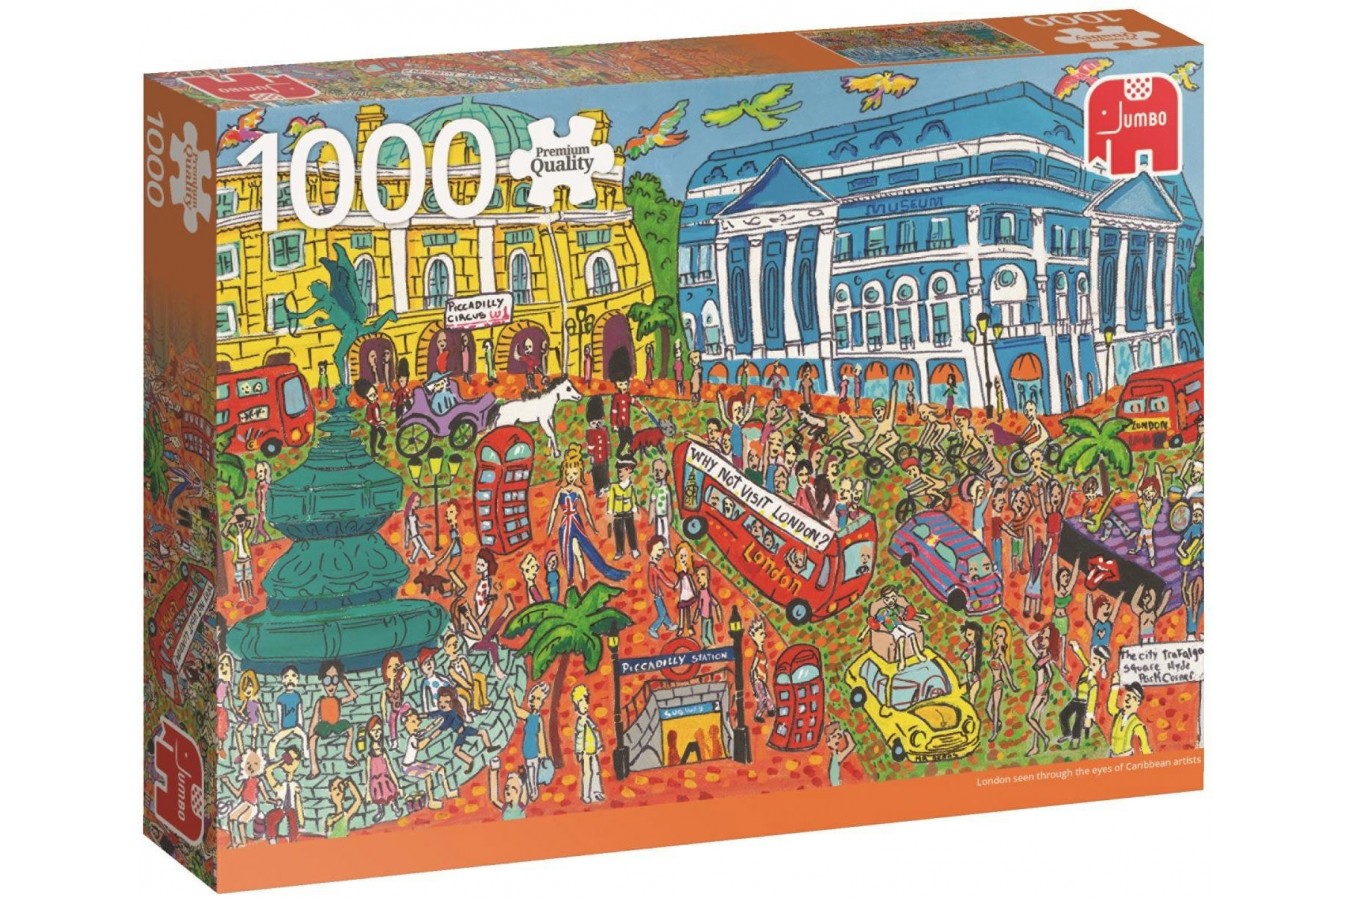 Puzzle Jumbo - Piccadilly Circus, London, 1000 piese (18563)